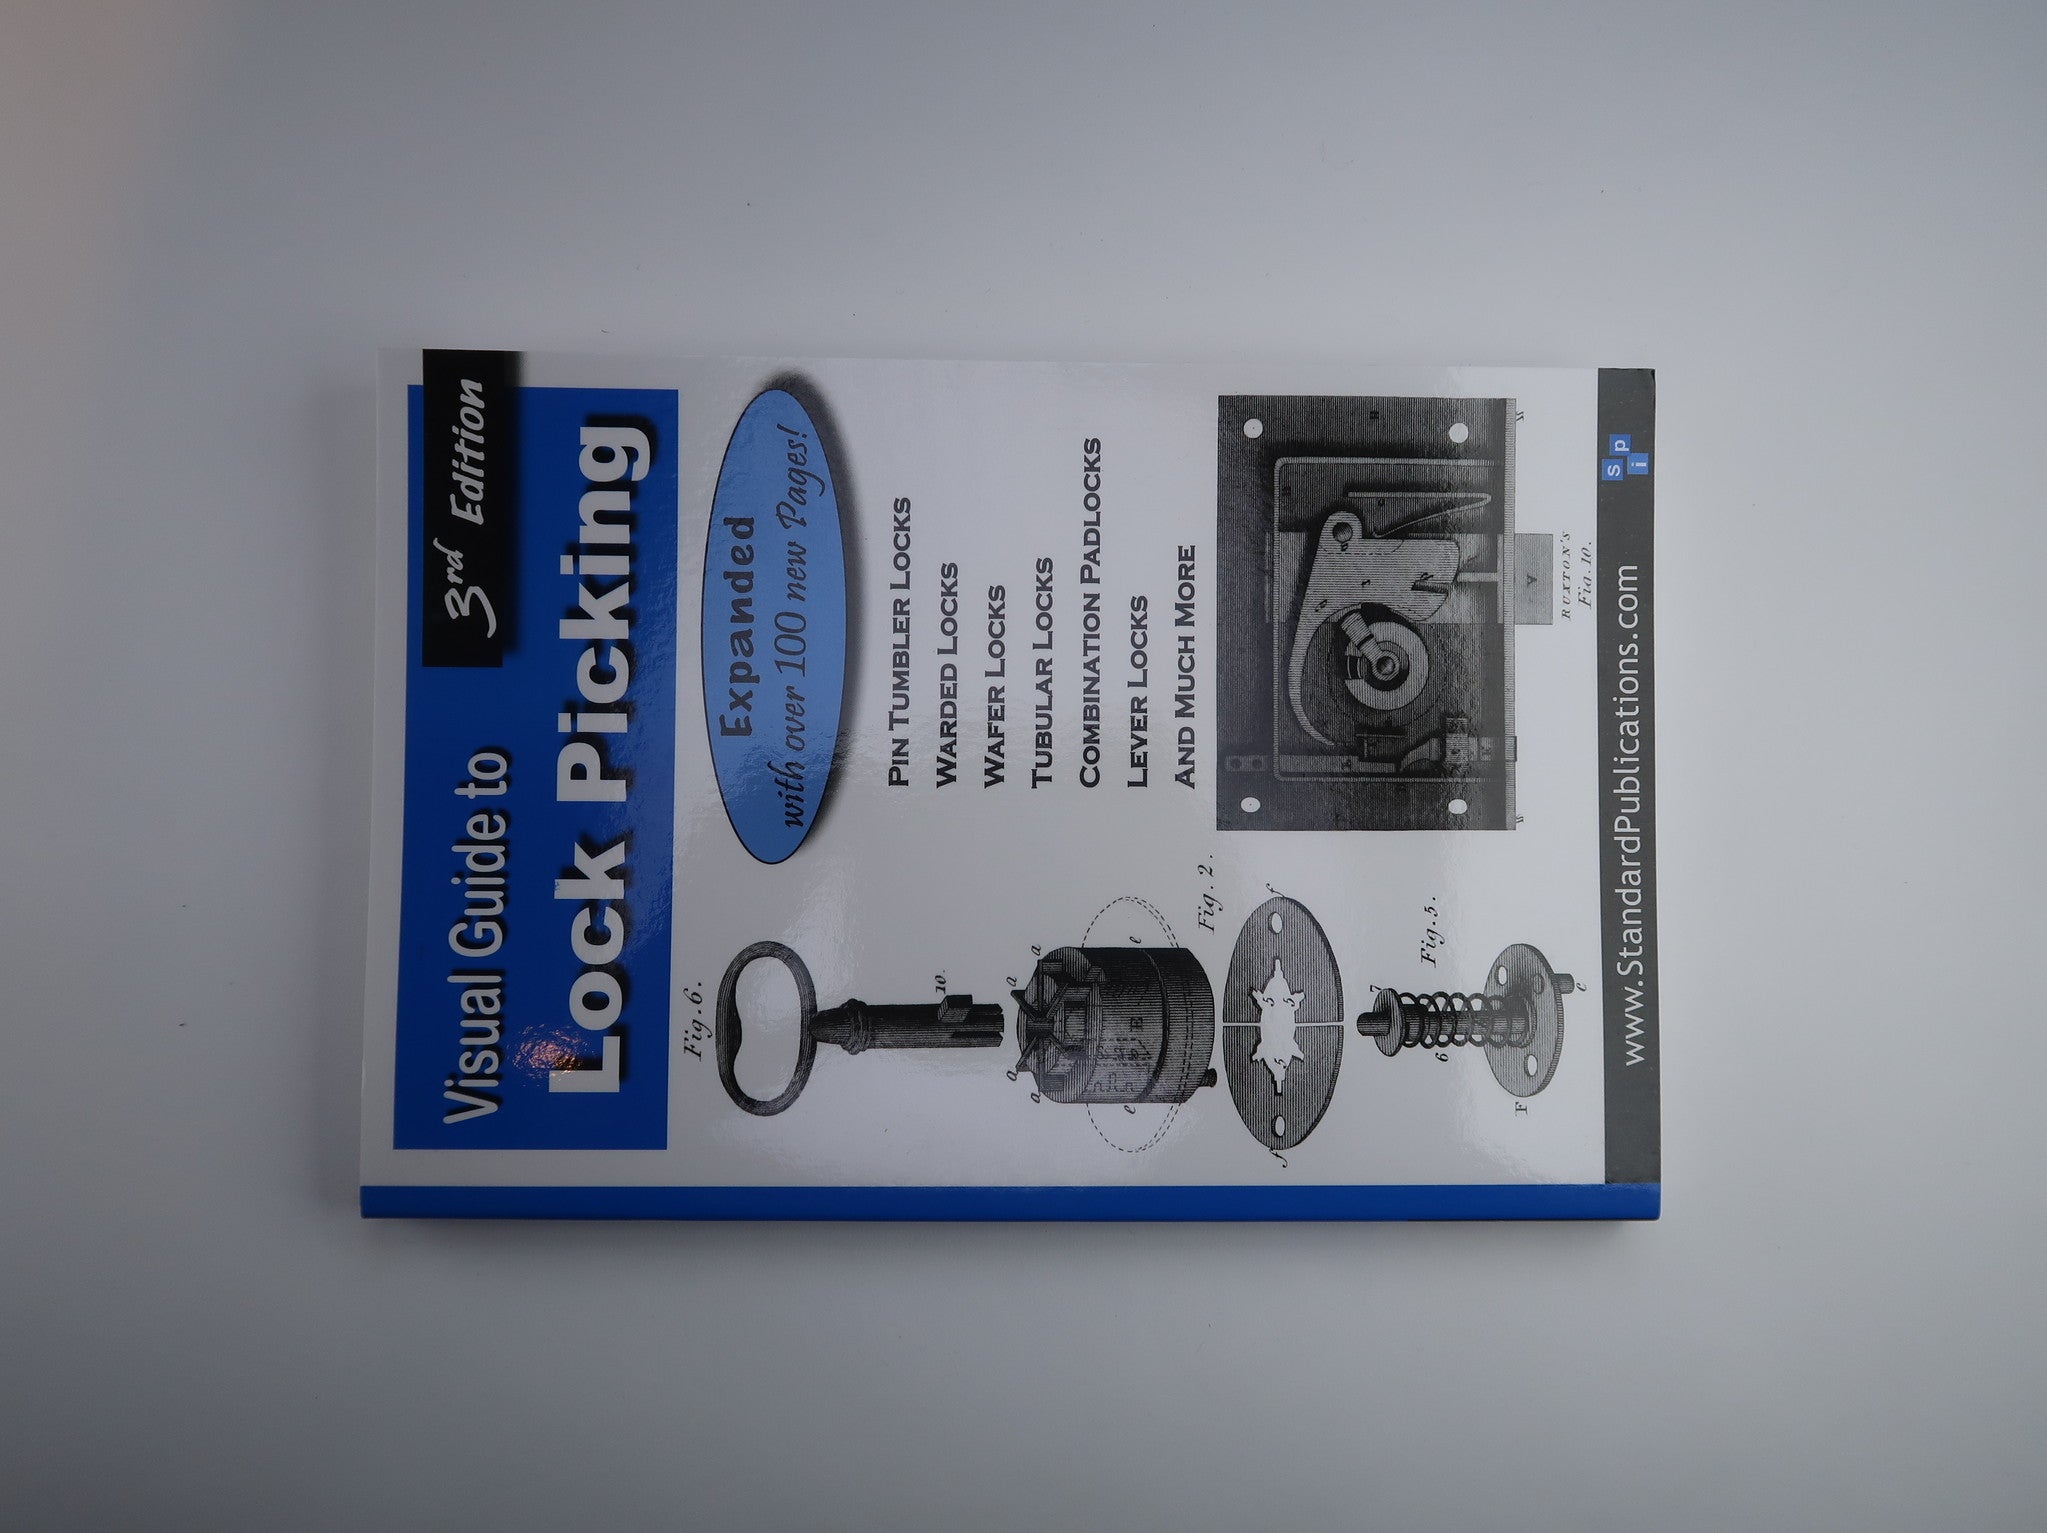 Visual Guide to Lockpicking Book